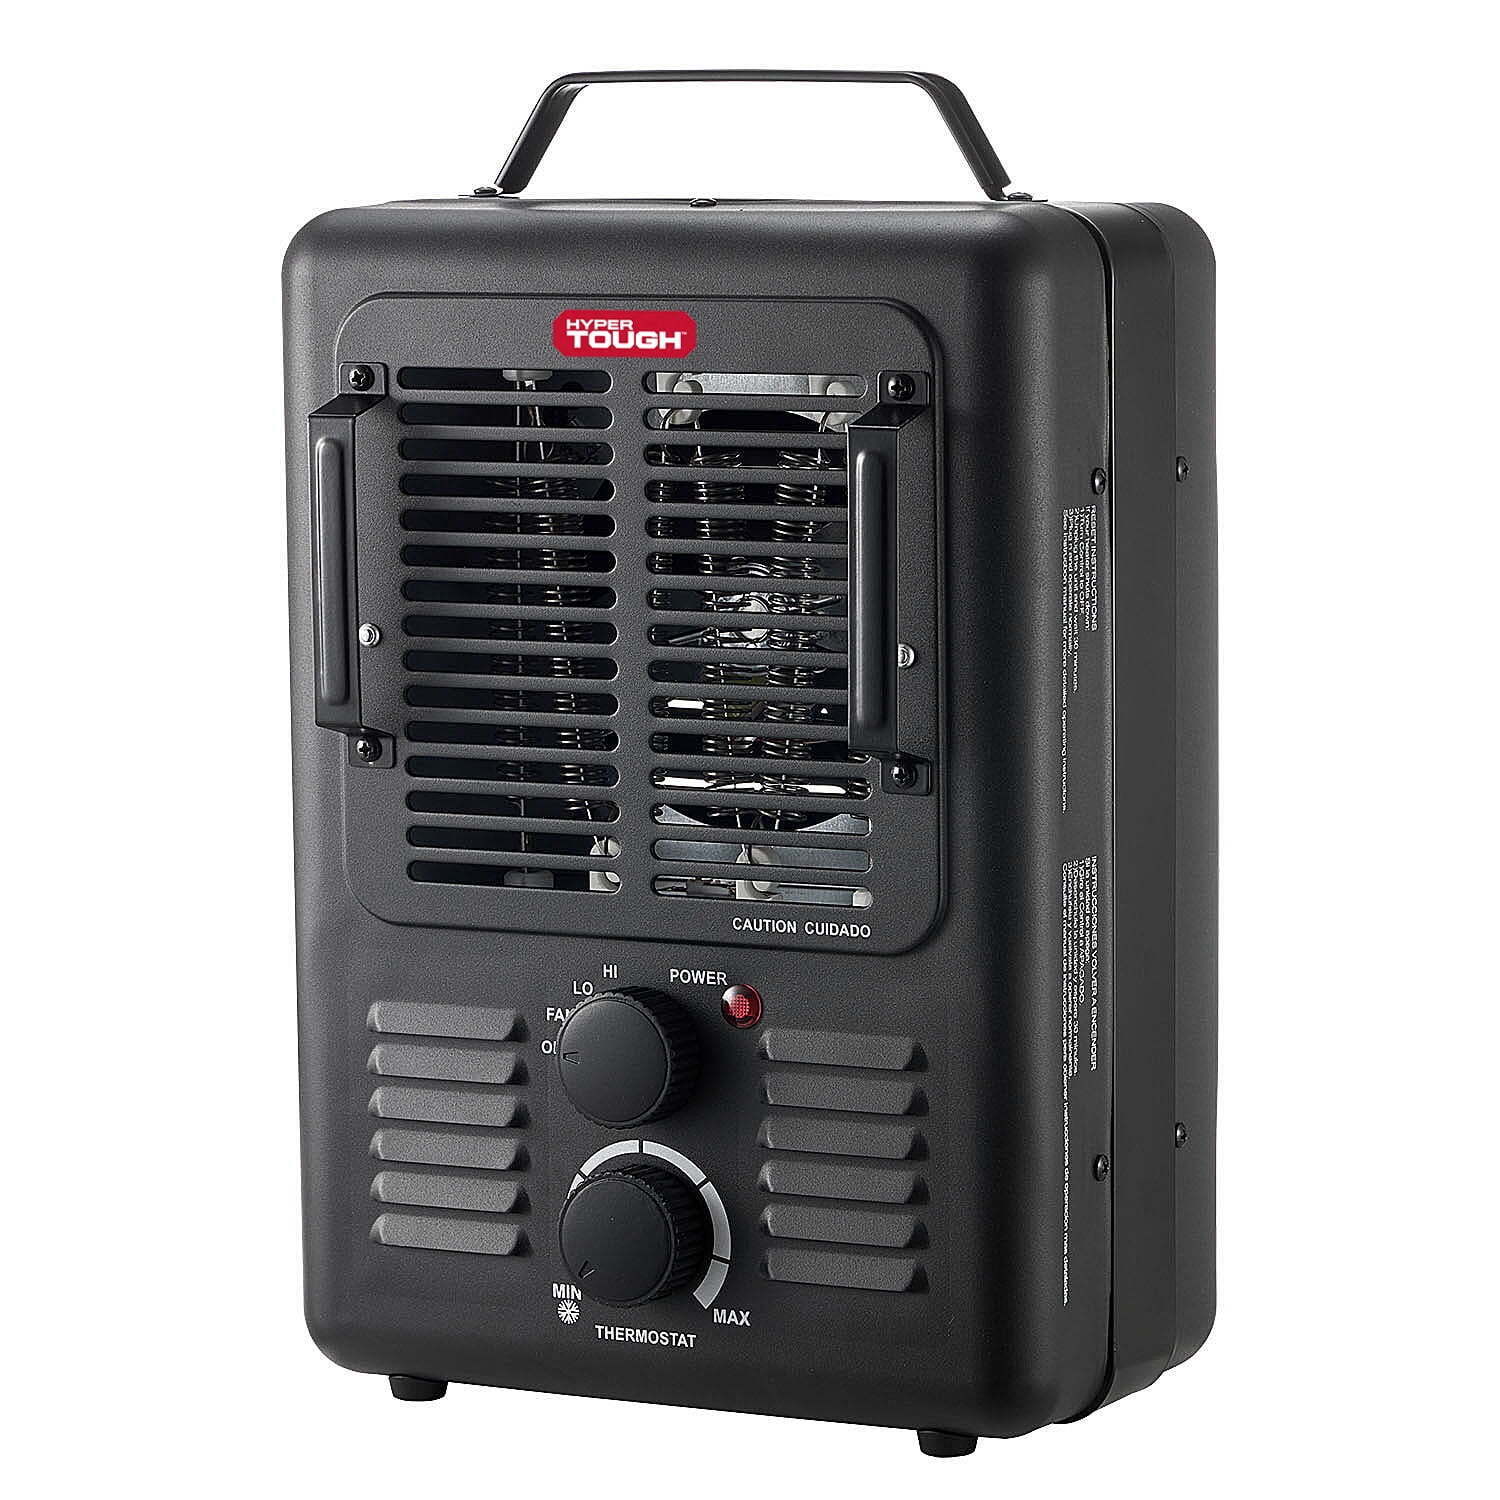 Super strong 1500 watt space heater with metal construction for extra durability